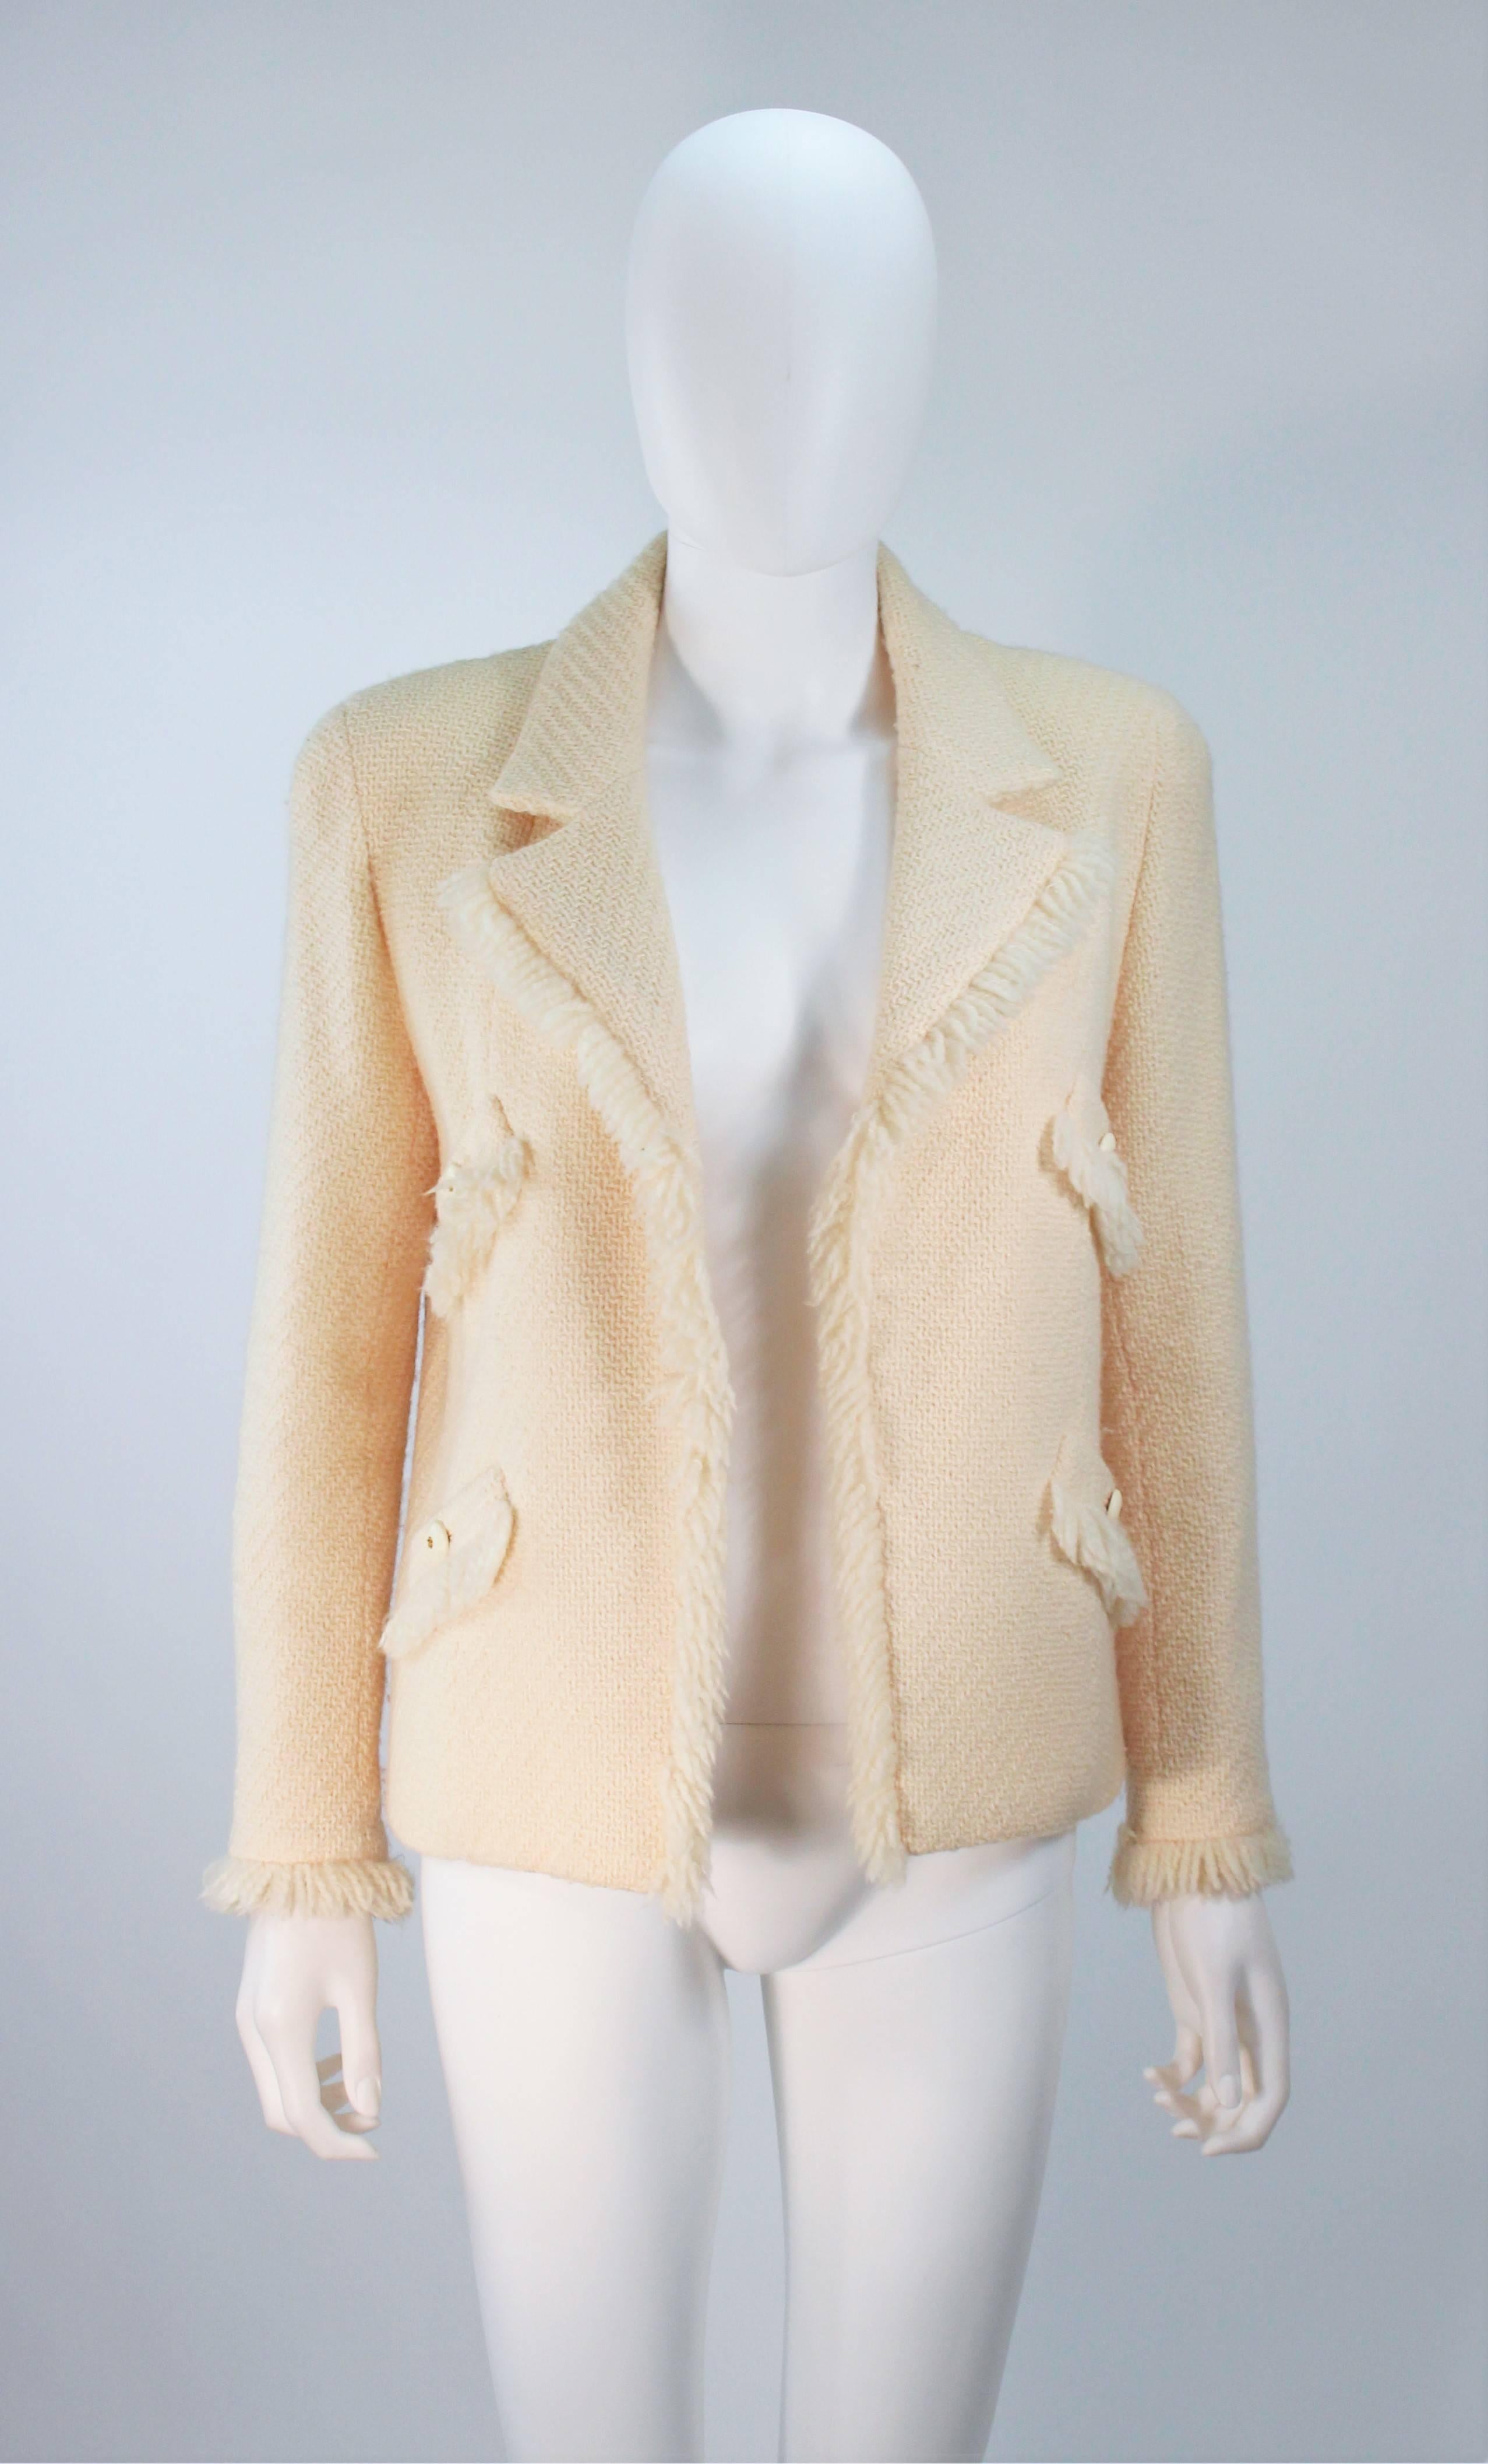 CHANEL Cream Wool 3pc Skirt Suit with Fringe Trim and Gold Hardware Size 38 1